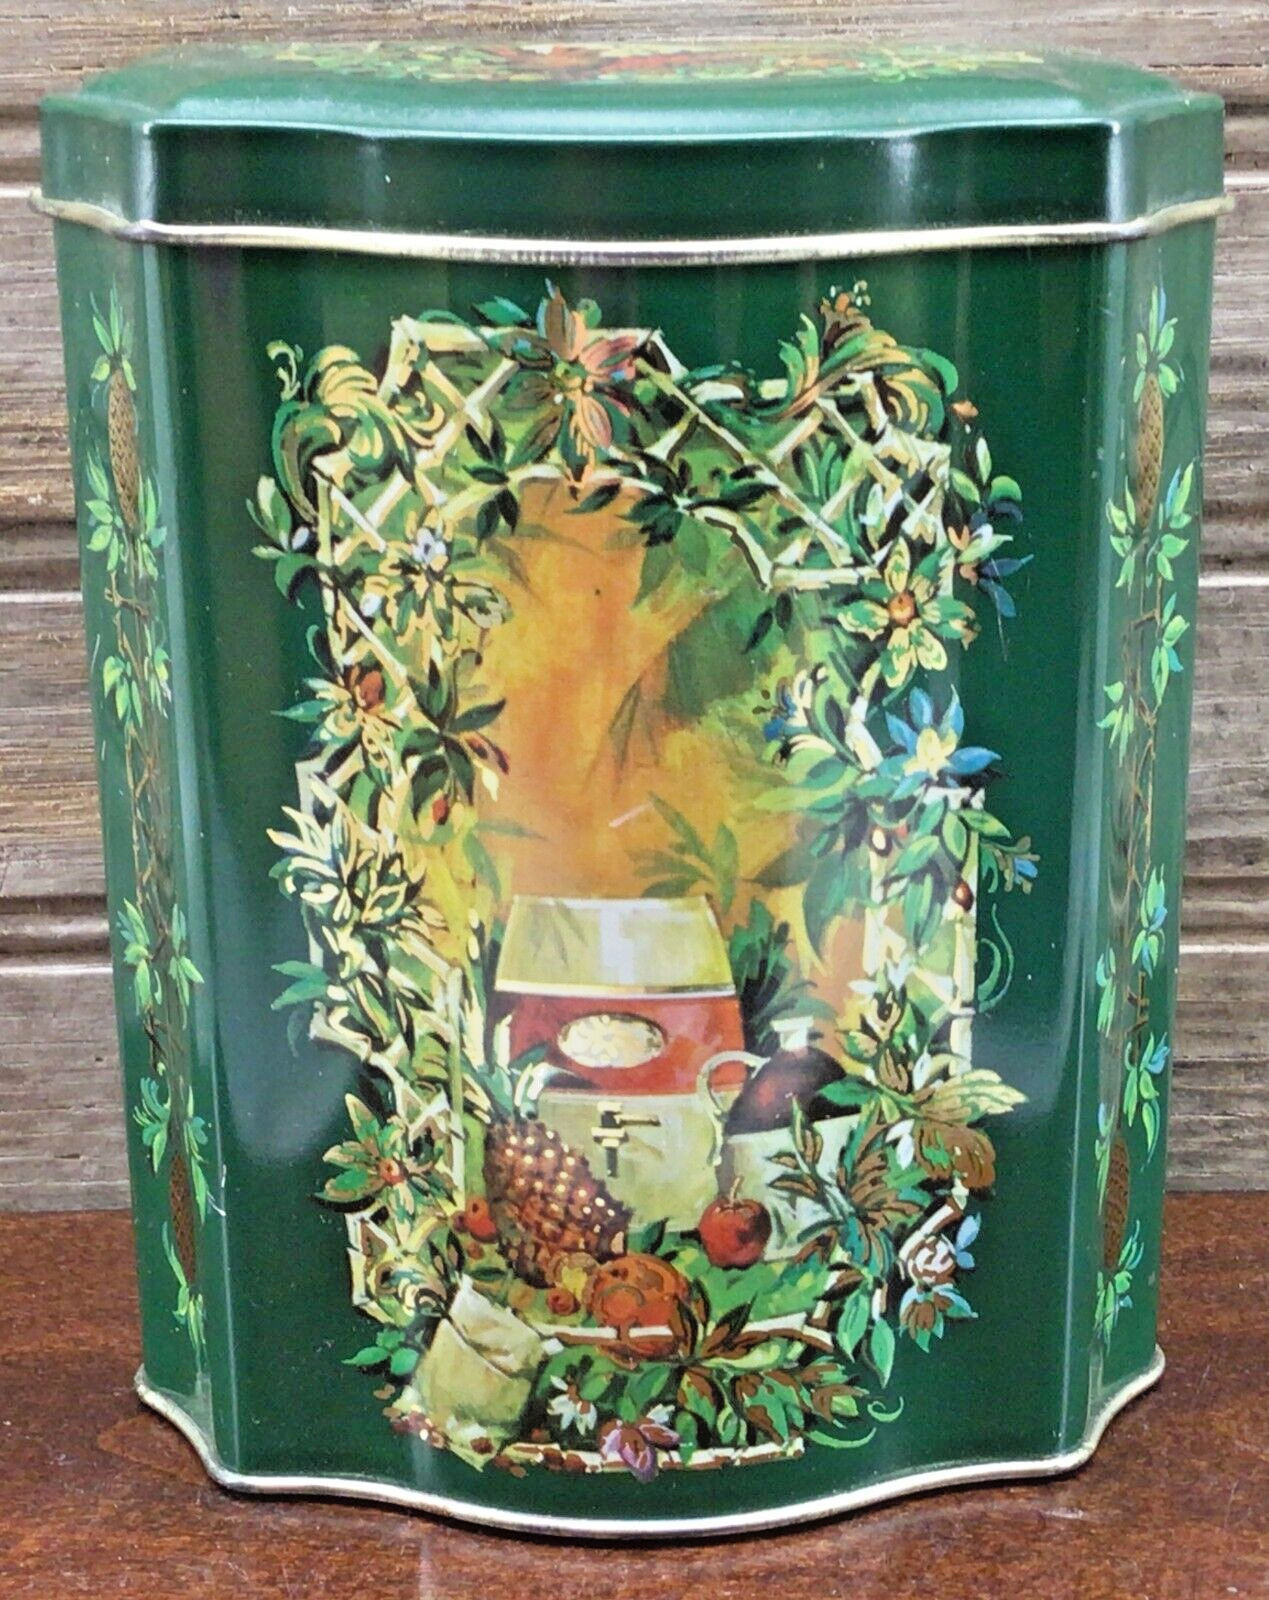 Vintage AVON Christmas Tin Canister Green Holiday Decorative England 1981